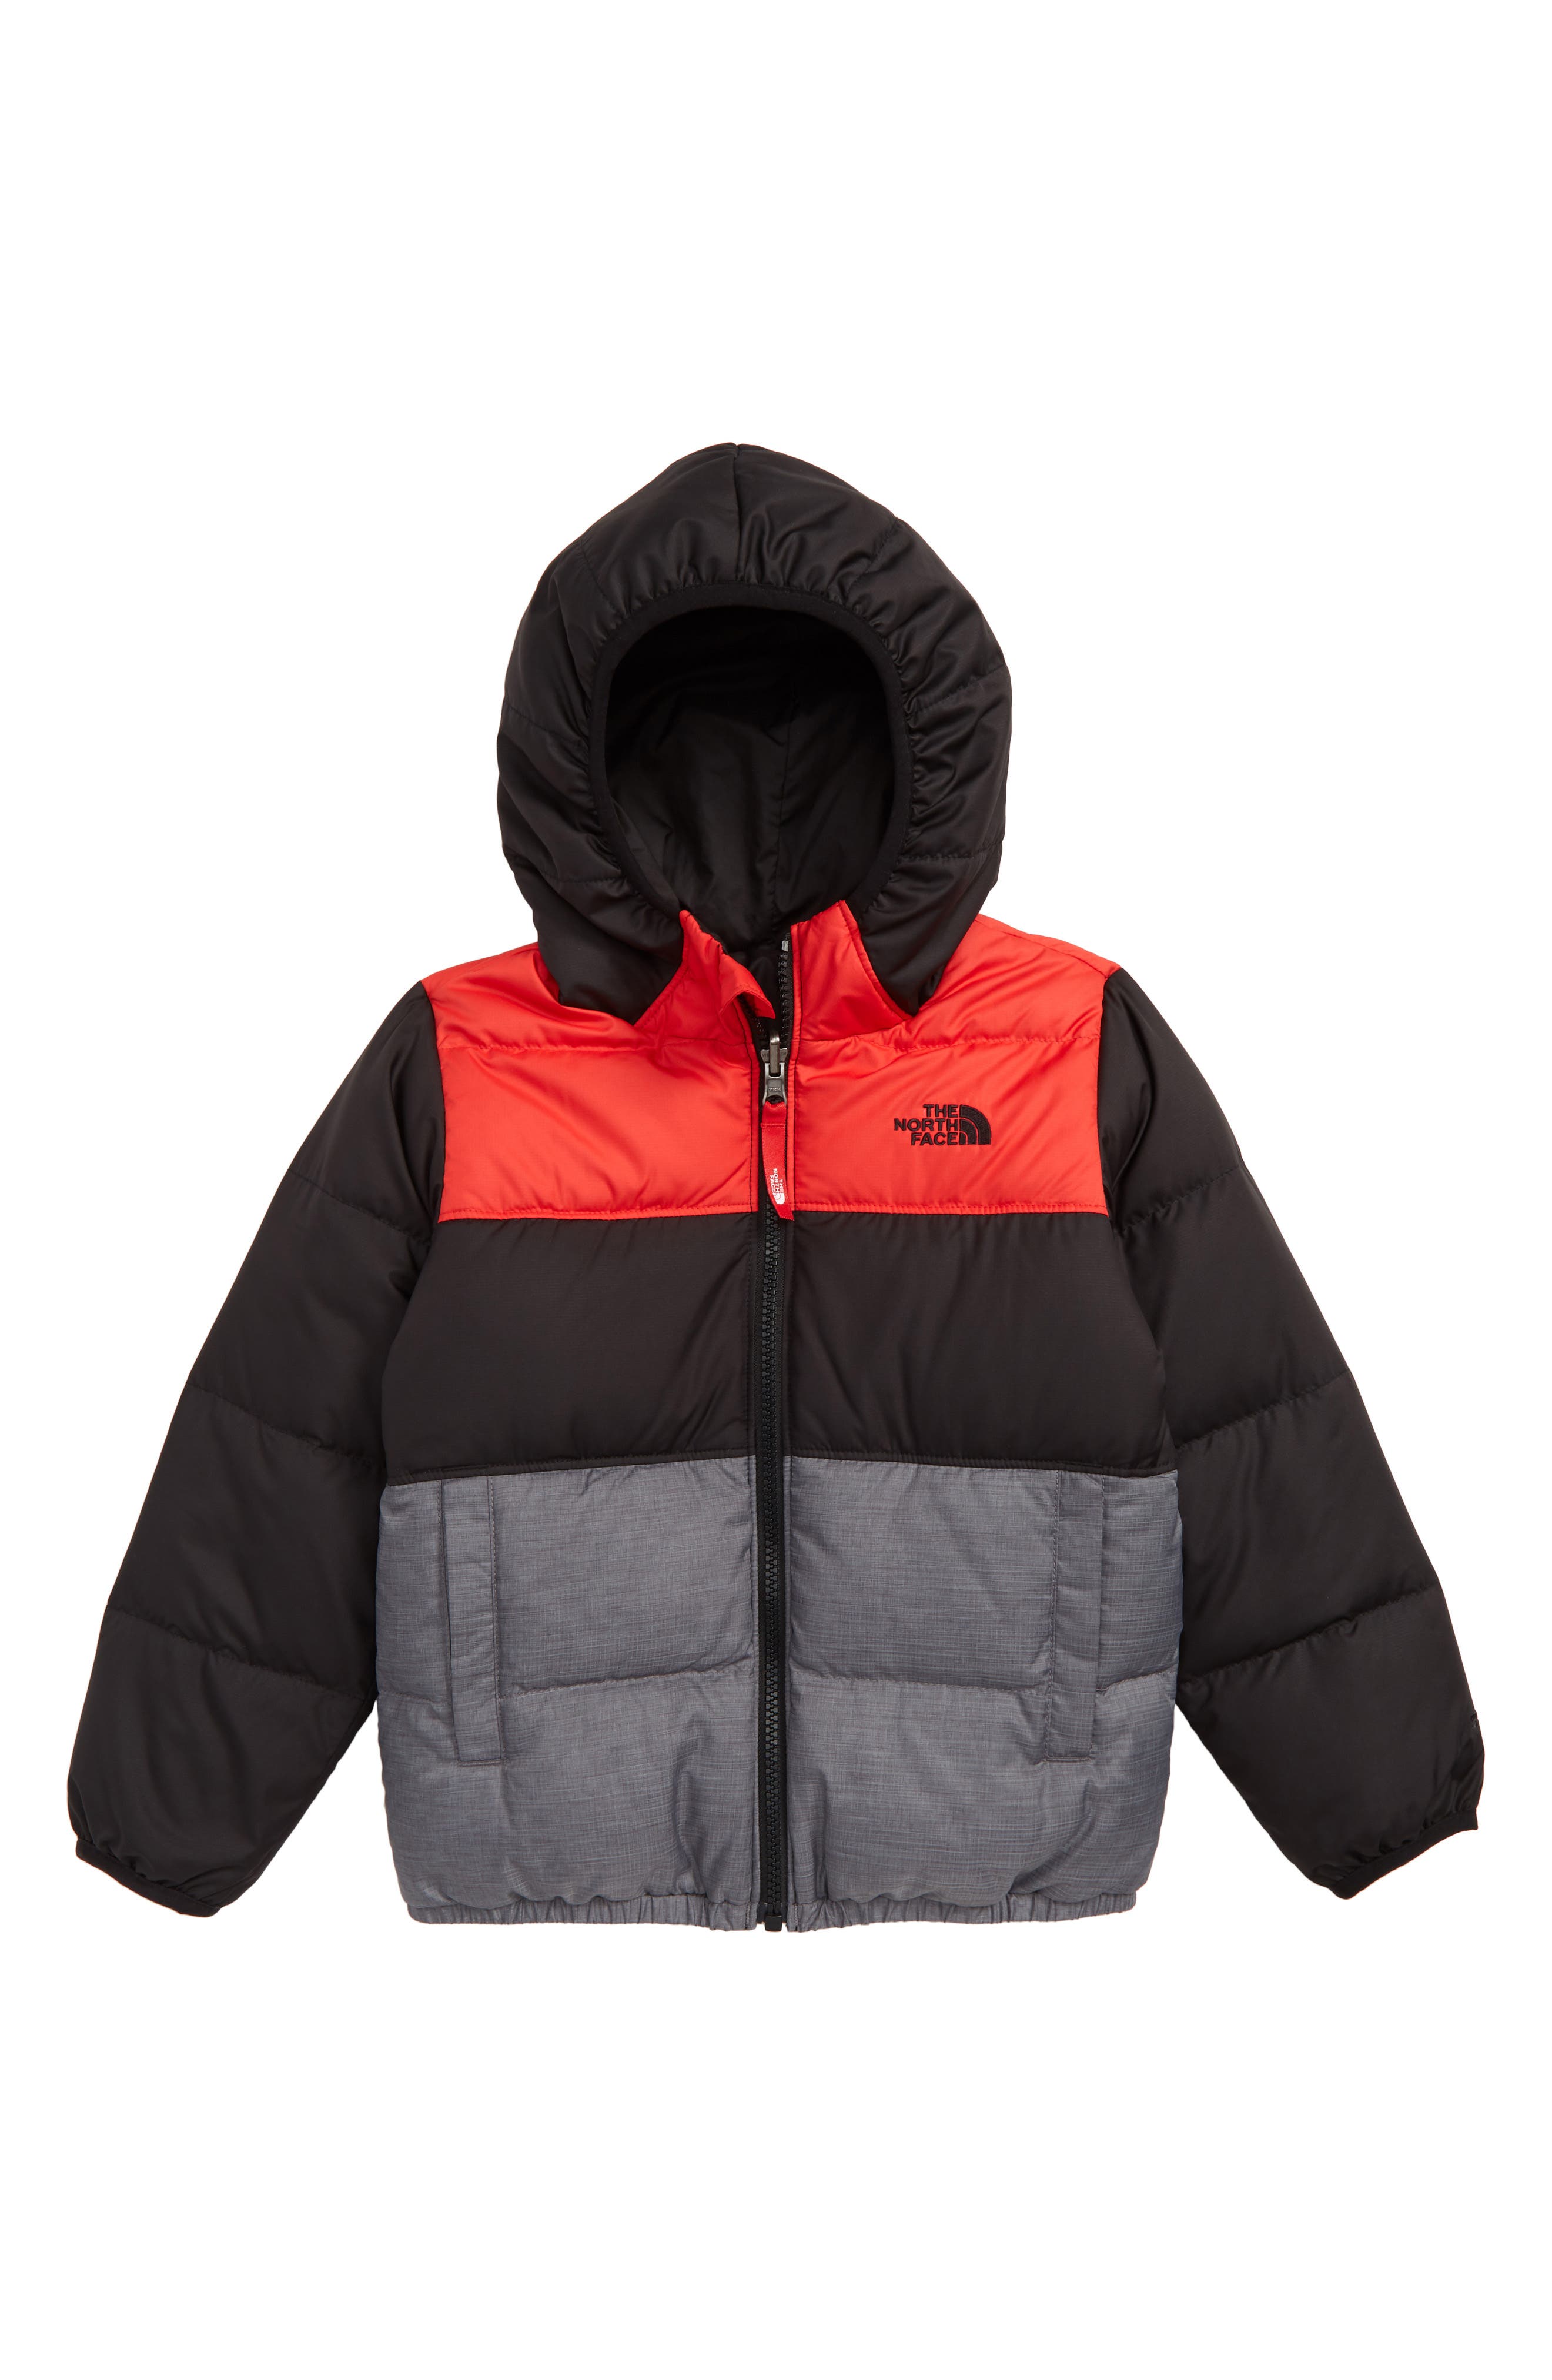 north face toddler jacket canada